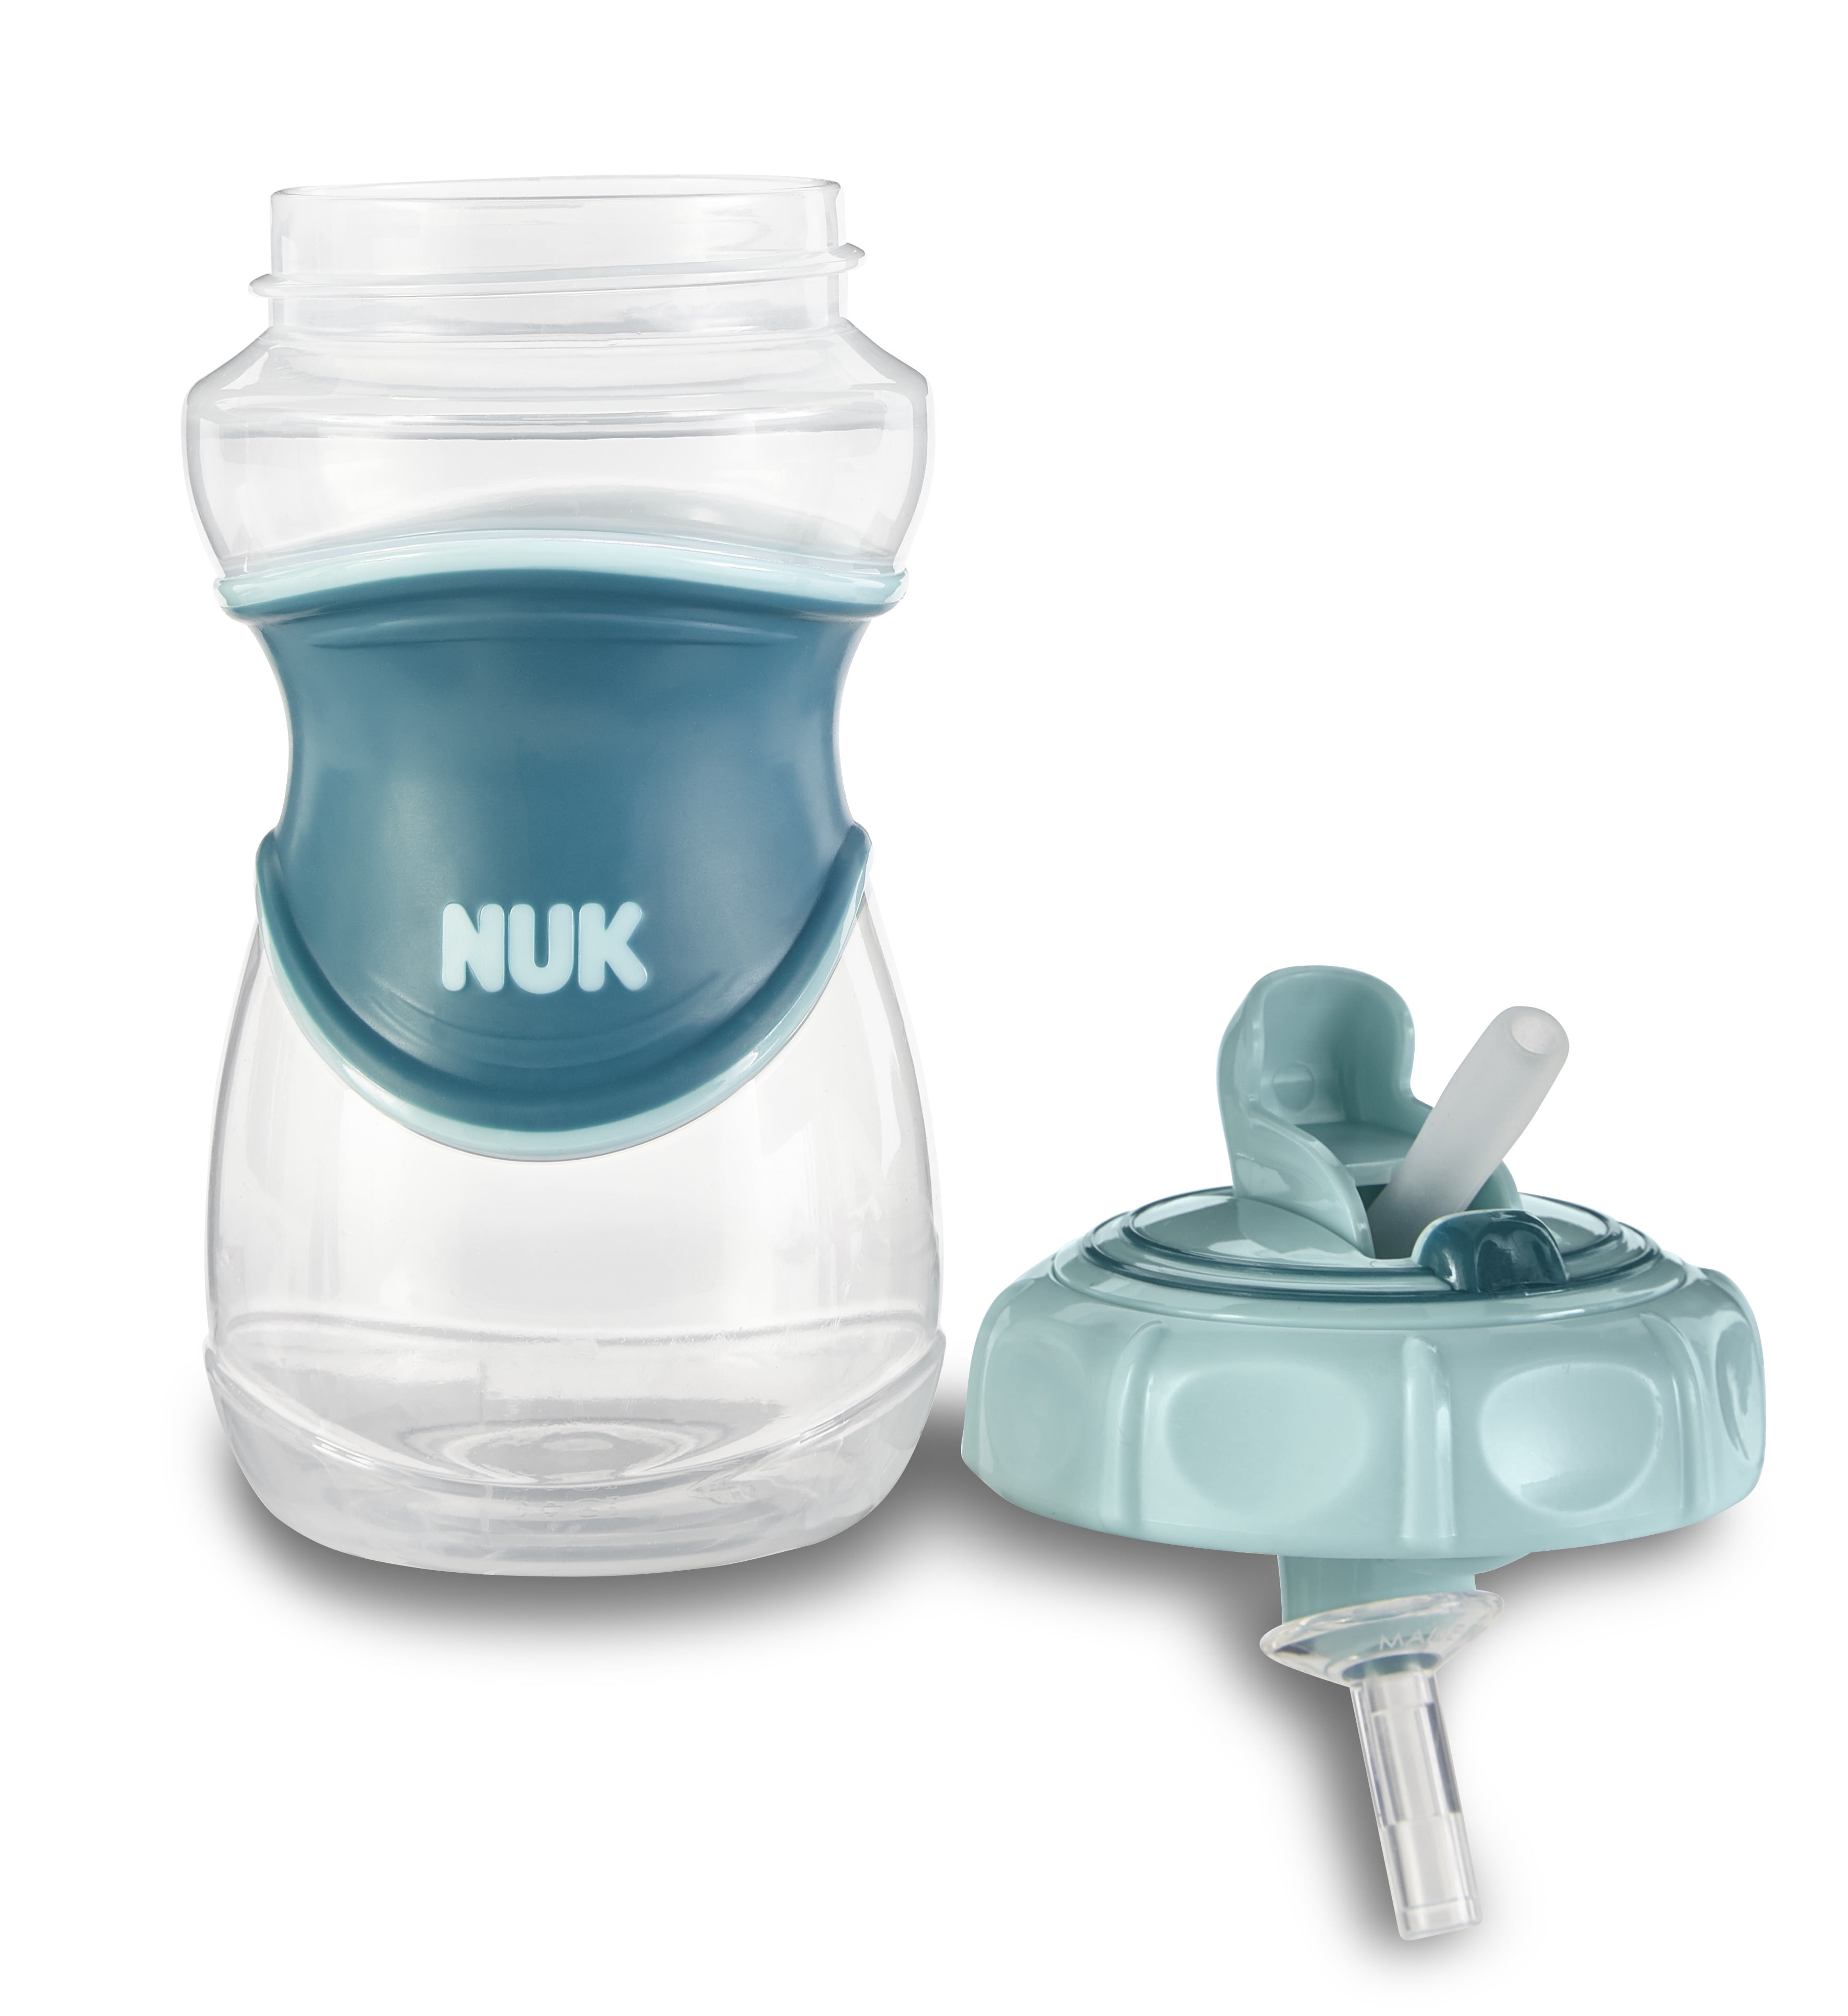 NUK Everlast Leakproof Weighted Straw Cup, 10 oz, 2 Pack, Teal -  Turquoise/Aqua - ShopStyle Kids & Baby Towels